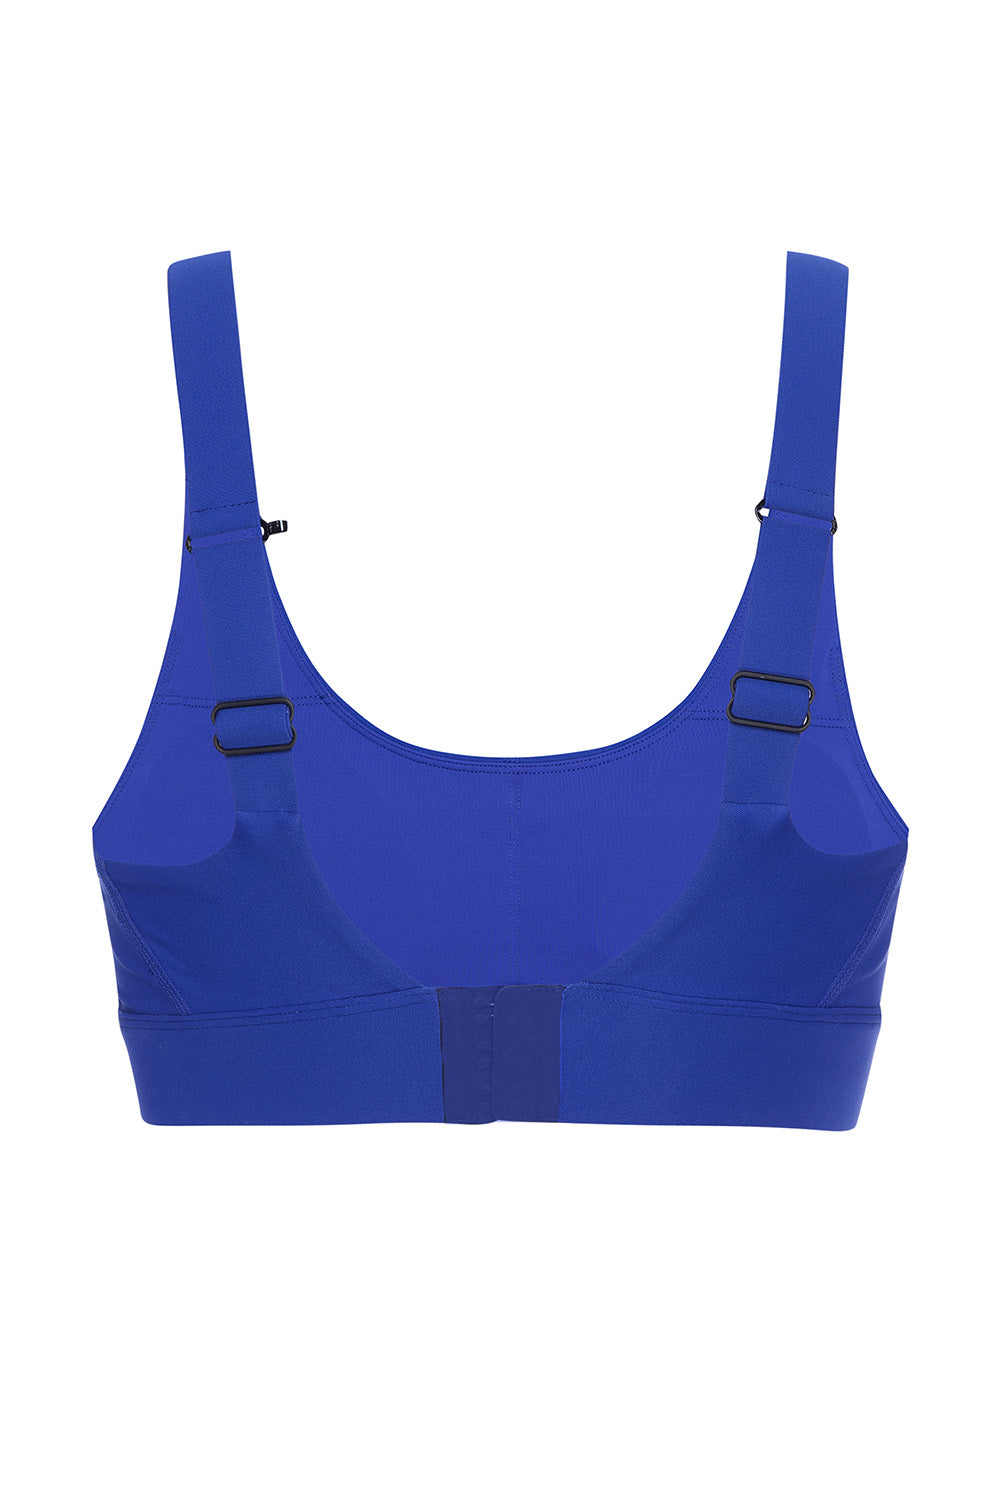 Soho cobalt active bra top on white background back view.